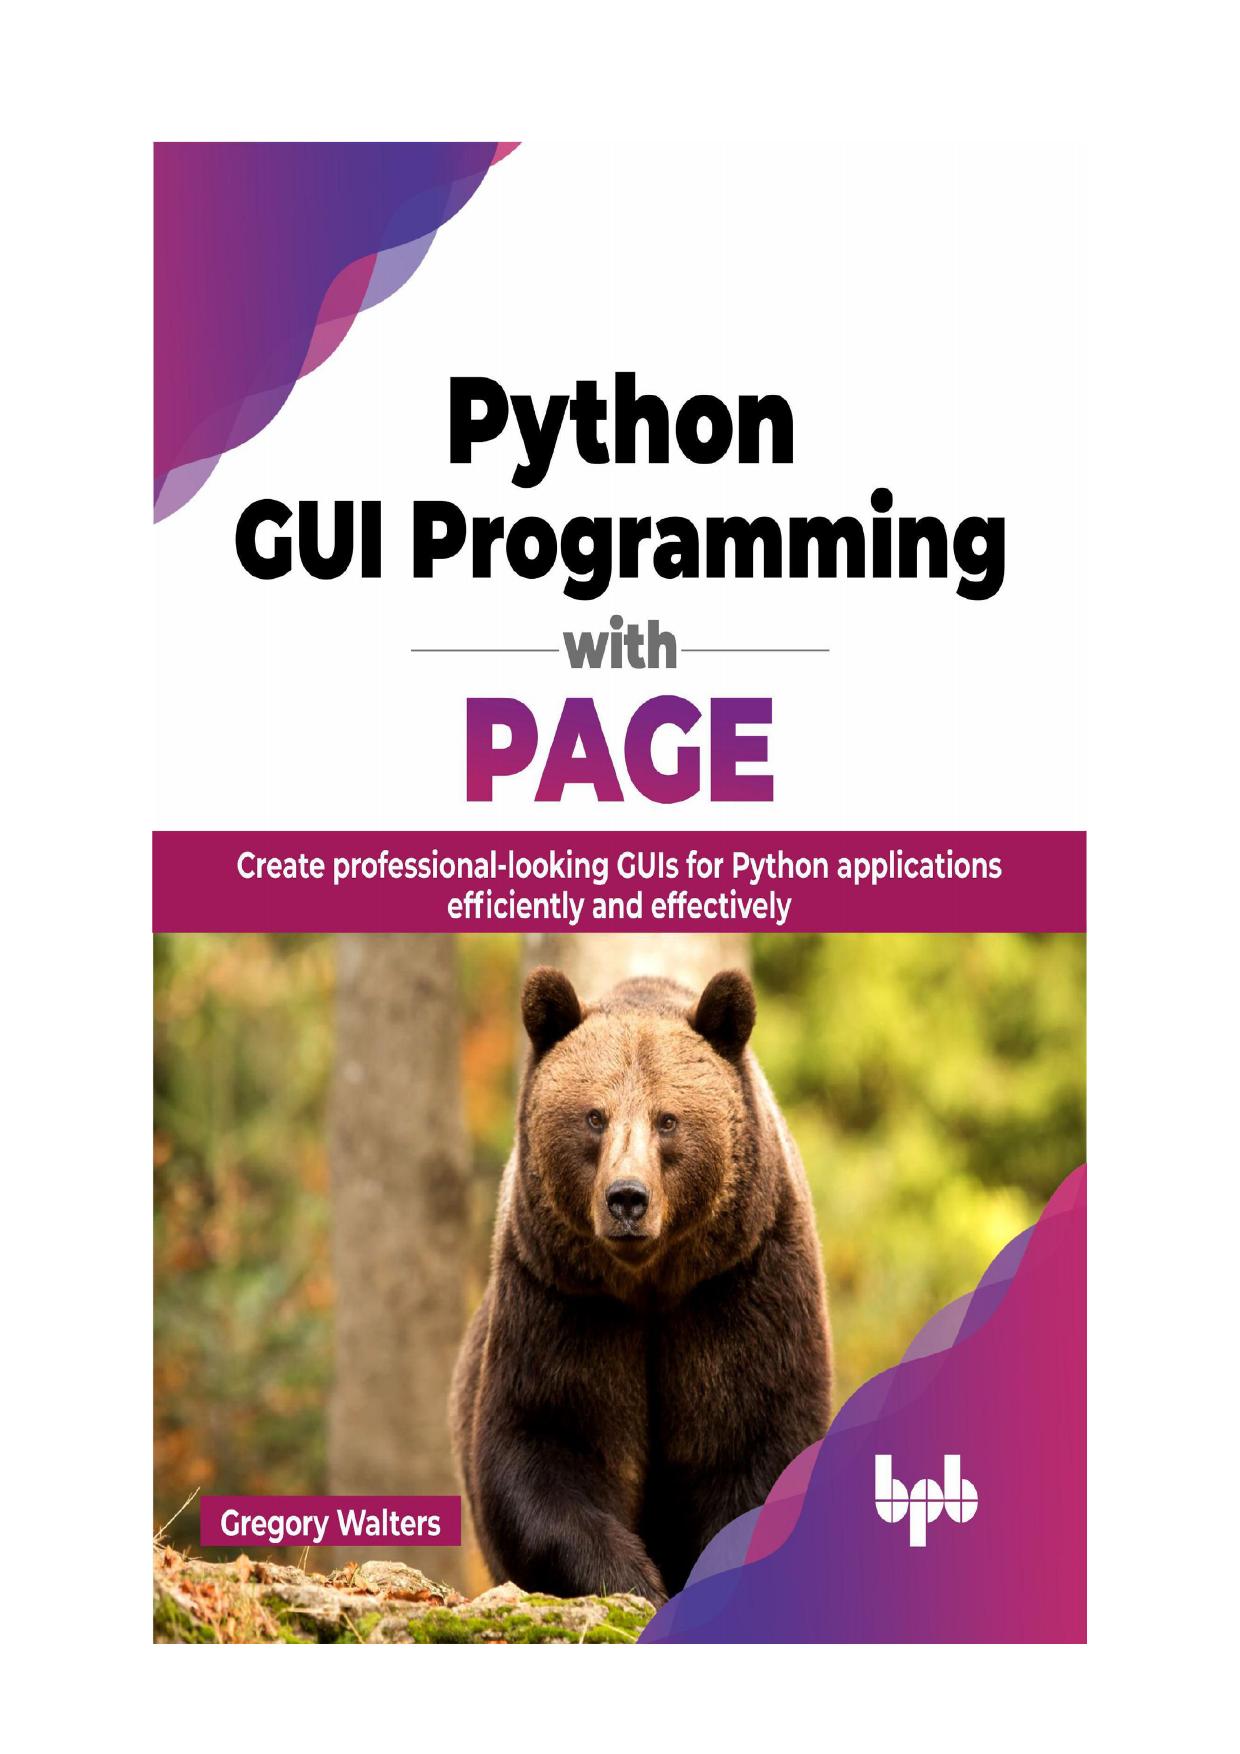 Python GUI Programming With PAGE: Create Professional-Looking GUIs for Python Applications Efficiently and Effectively (English Edition)